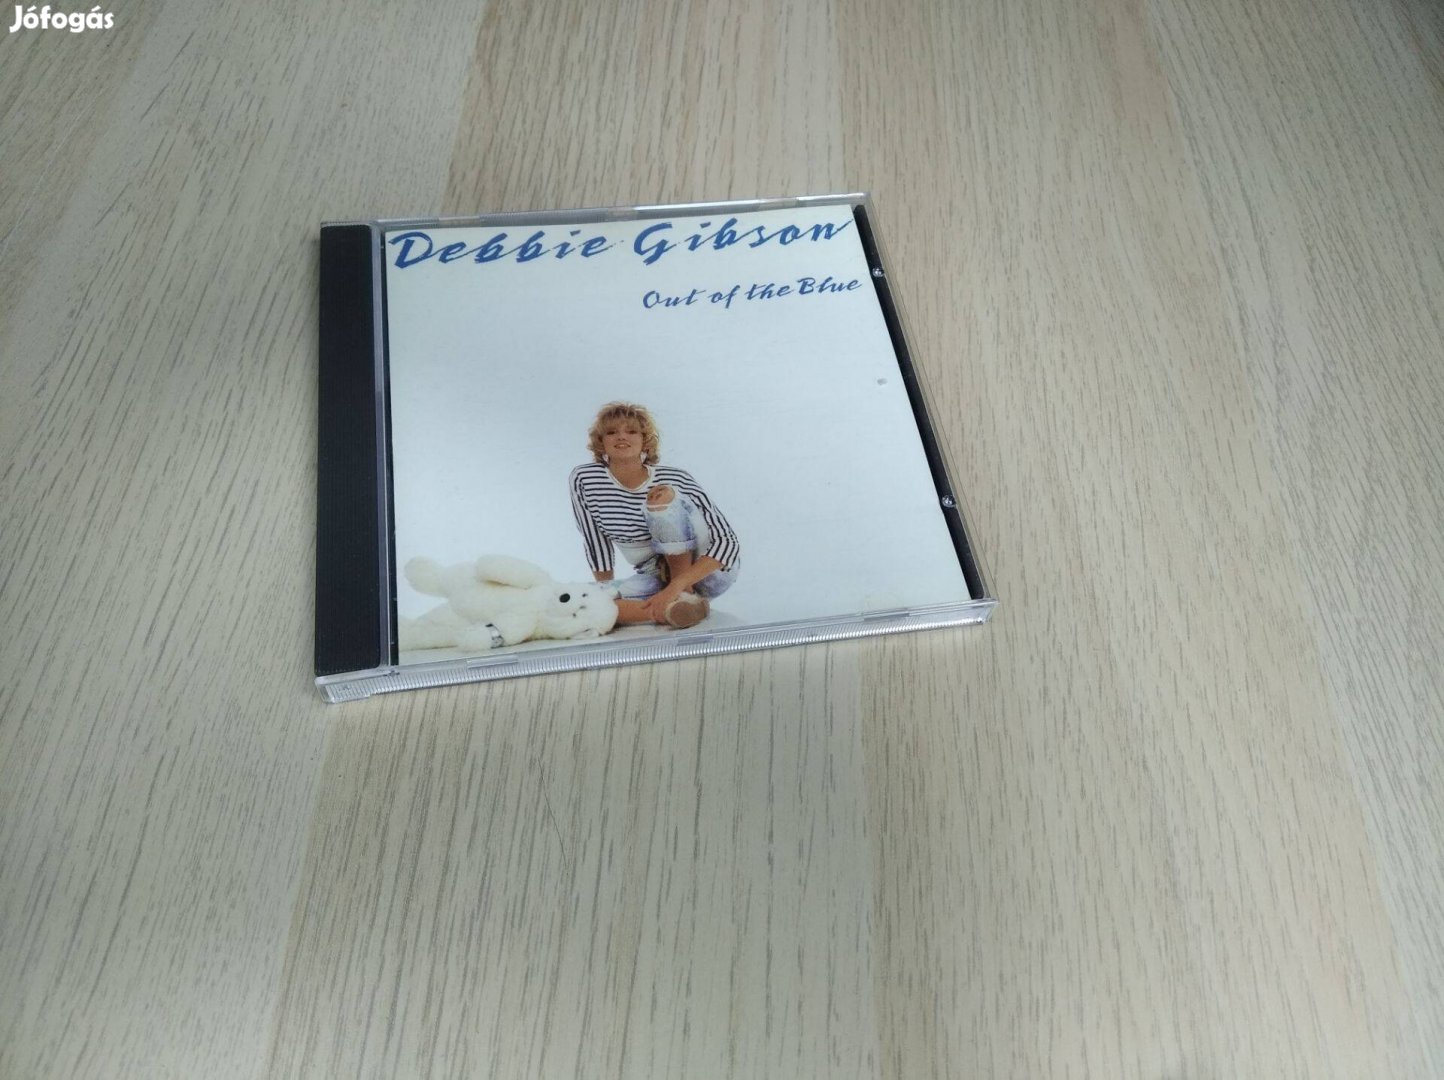 Debbie Gibson - Out Of The Blue / CD